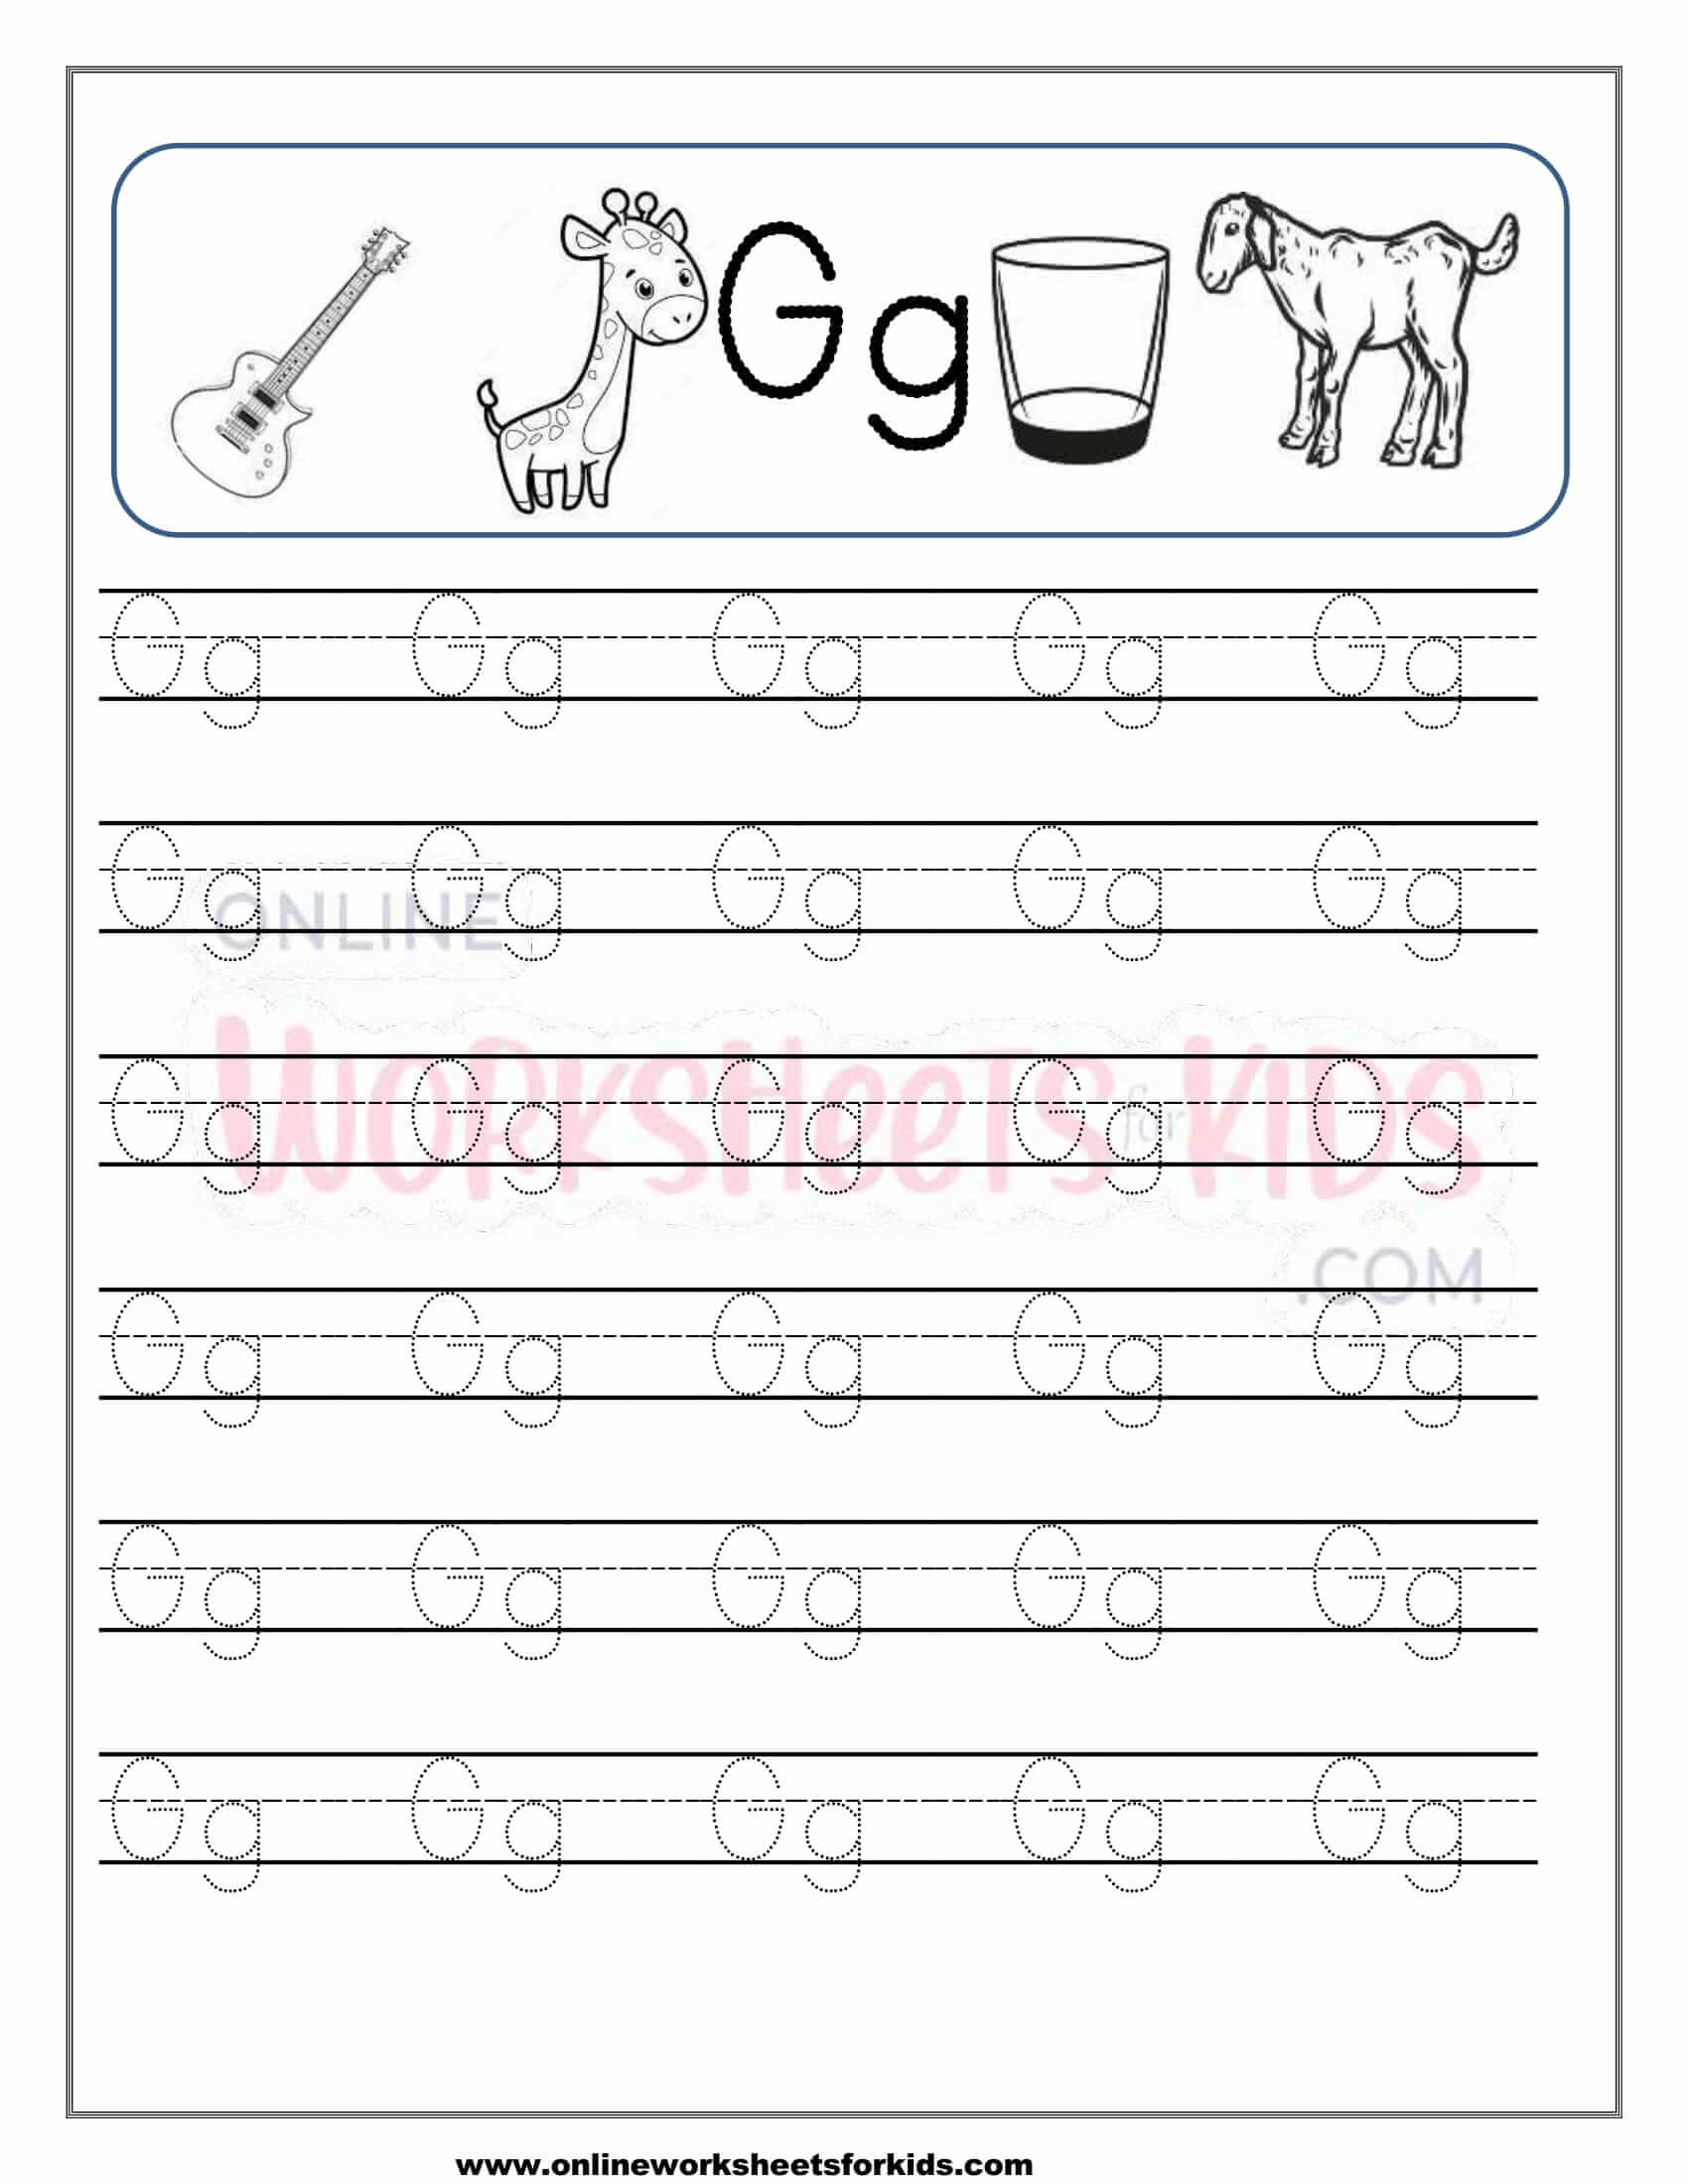 Capital And Small Letter Tracing Worksheet 7